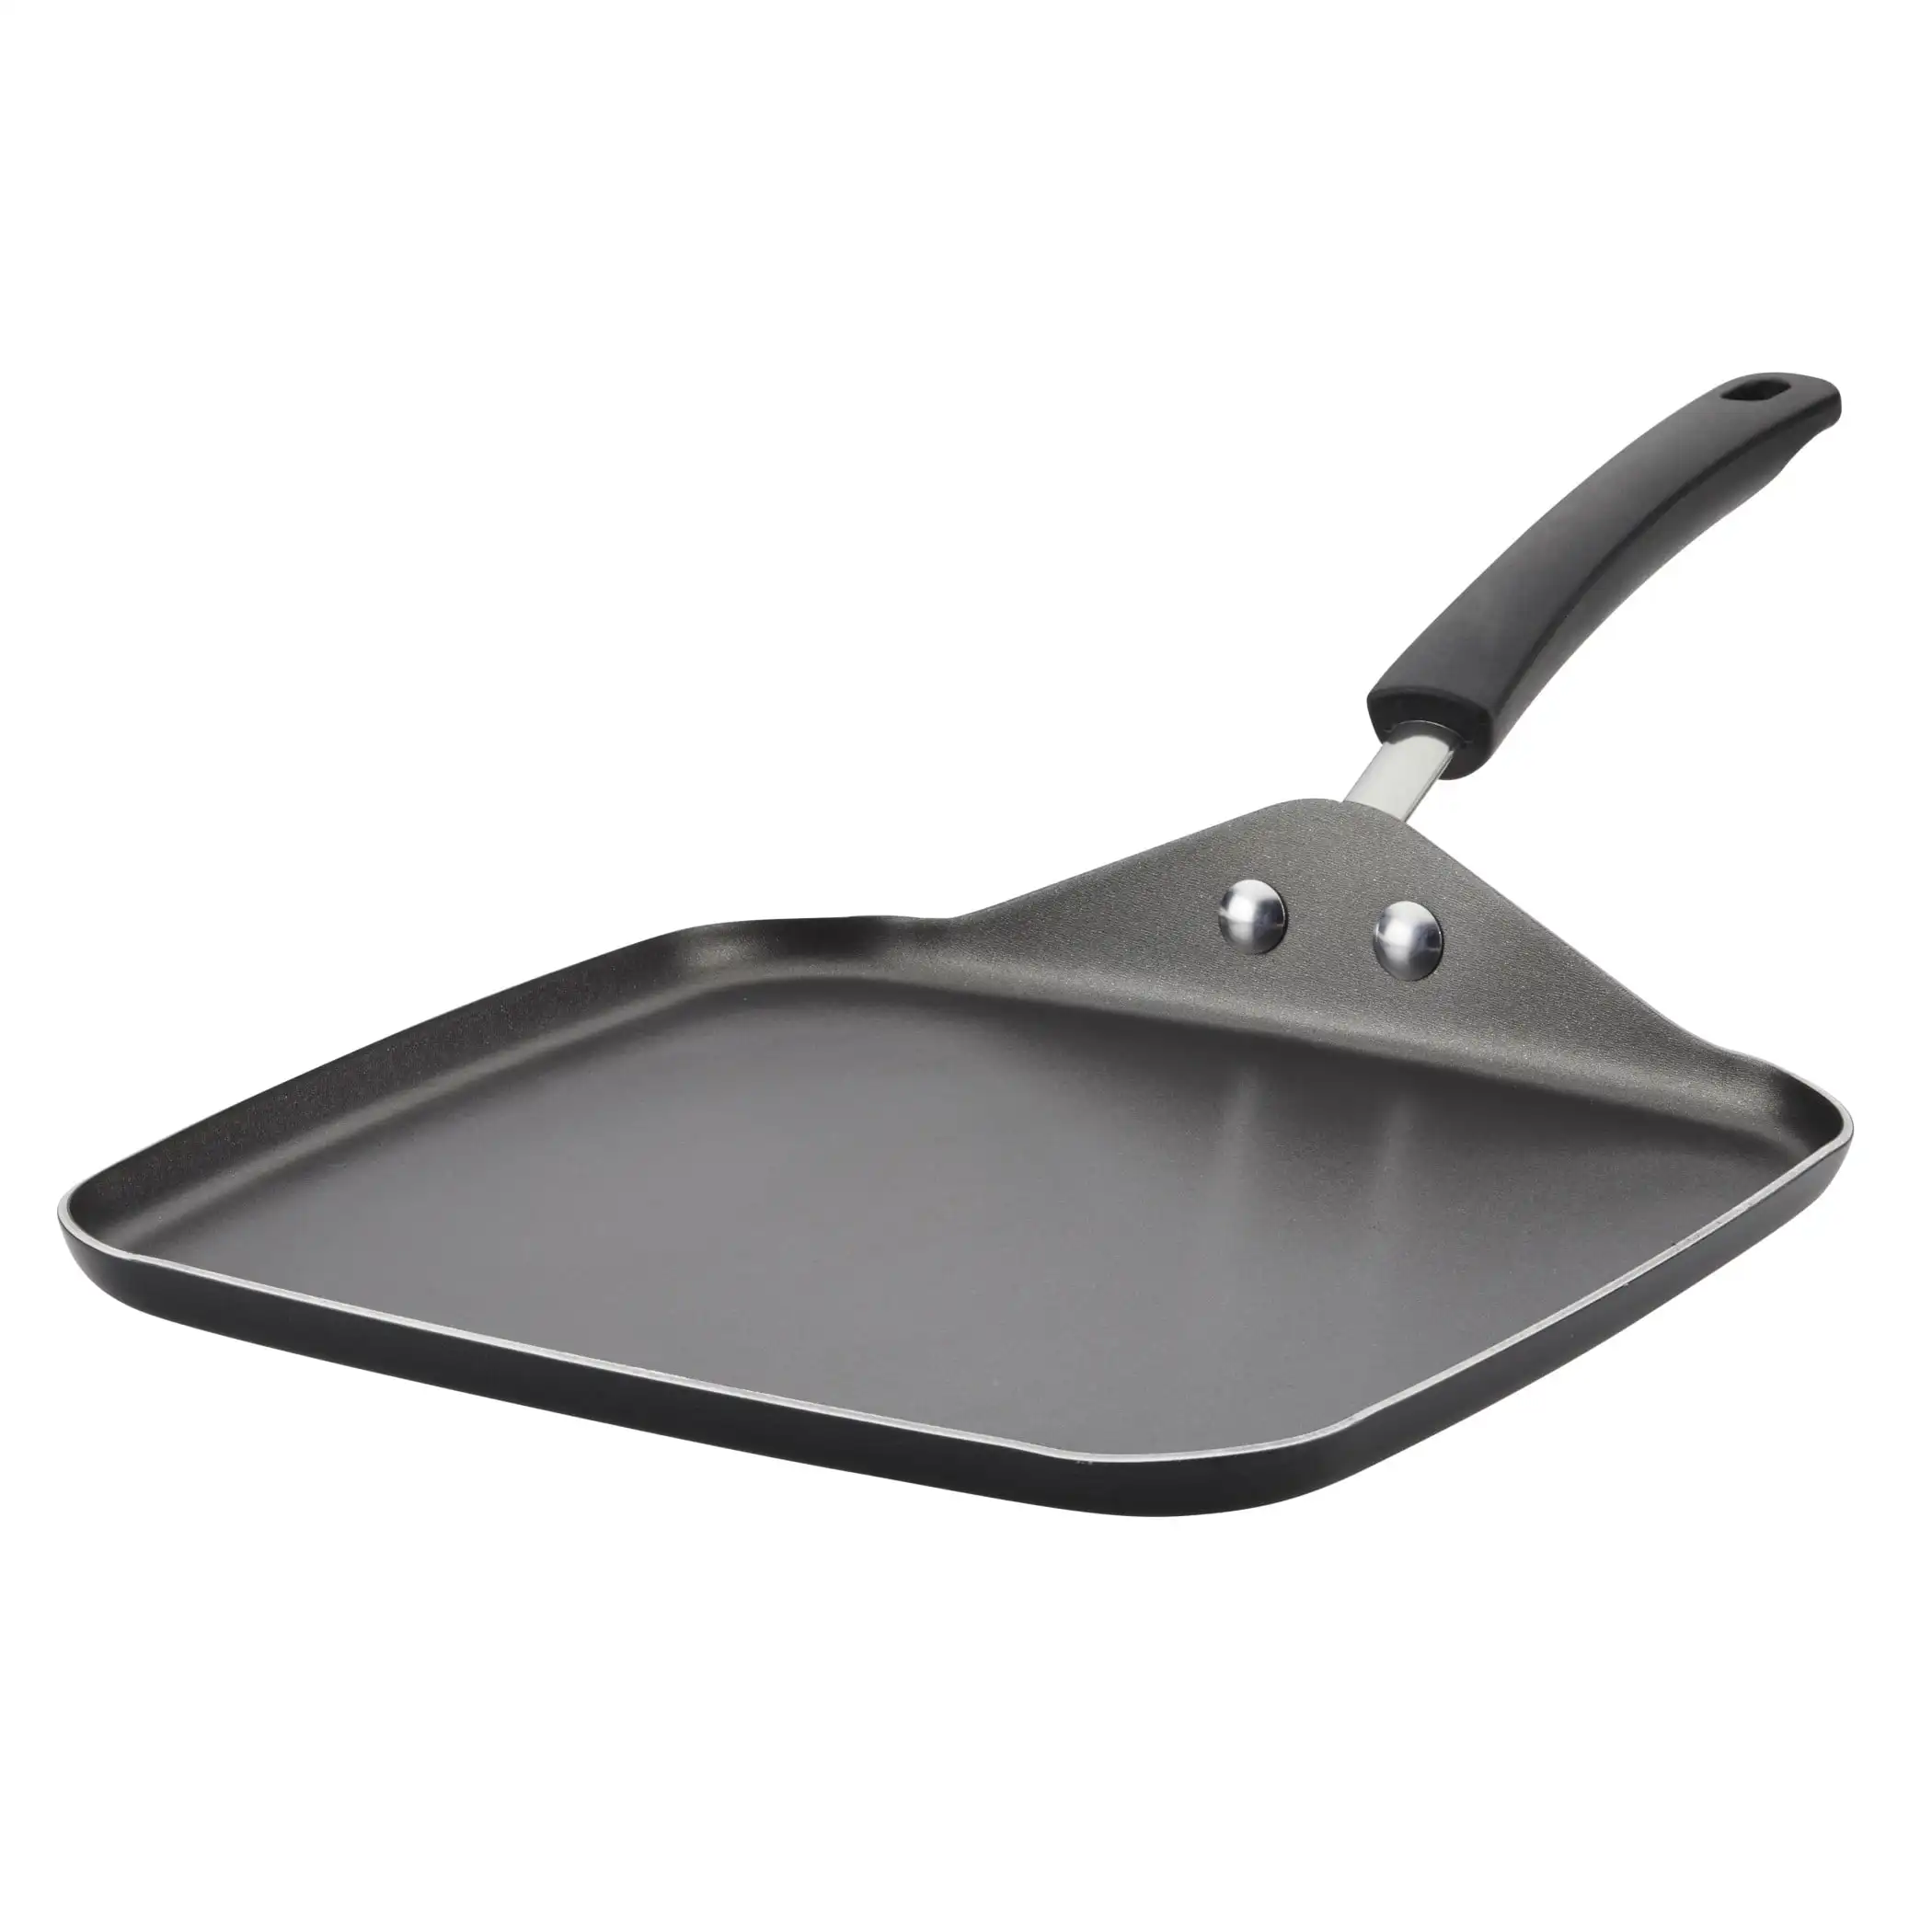 

Delivery within 7-10 daysHuanQiu 11-inch Aluminum Non-Stick Square Griddle, Black